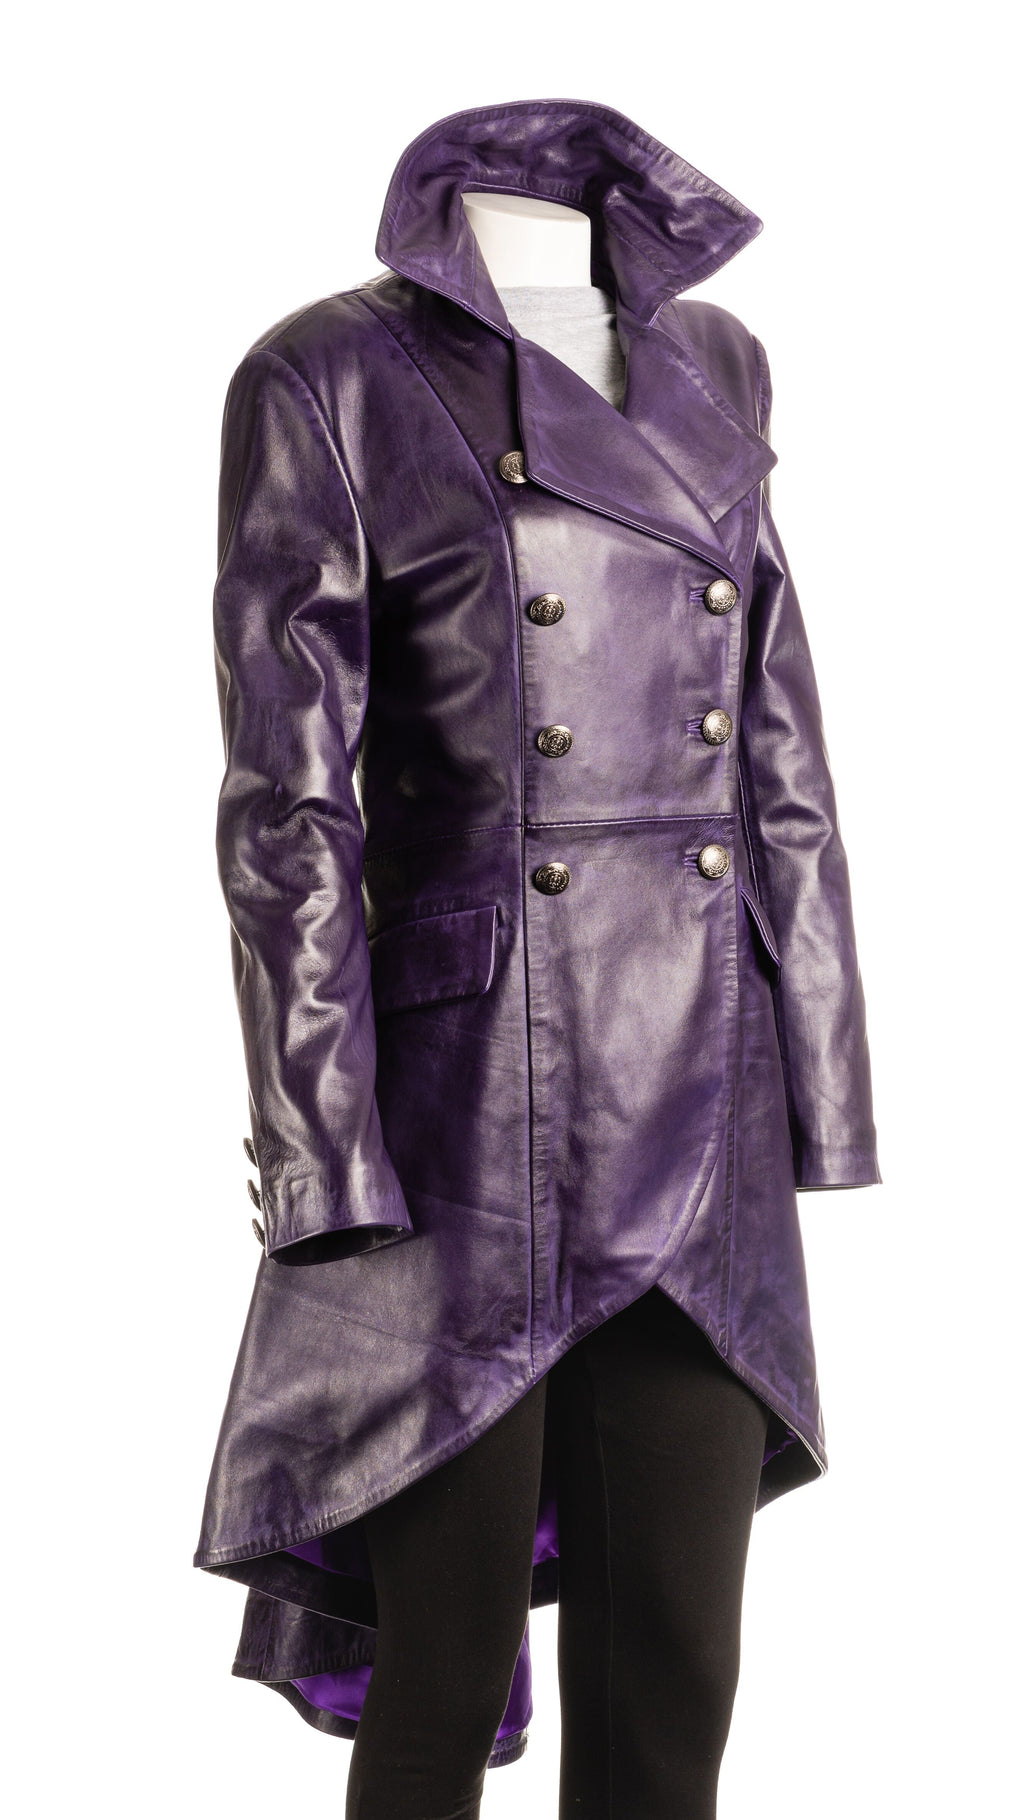 Ladies Purple Leather Dip Hem Double Breasted Edwardian Military Style 3/4 Coat: Alessia